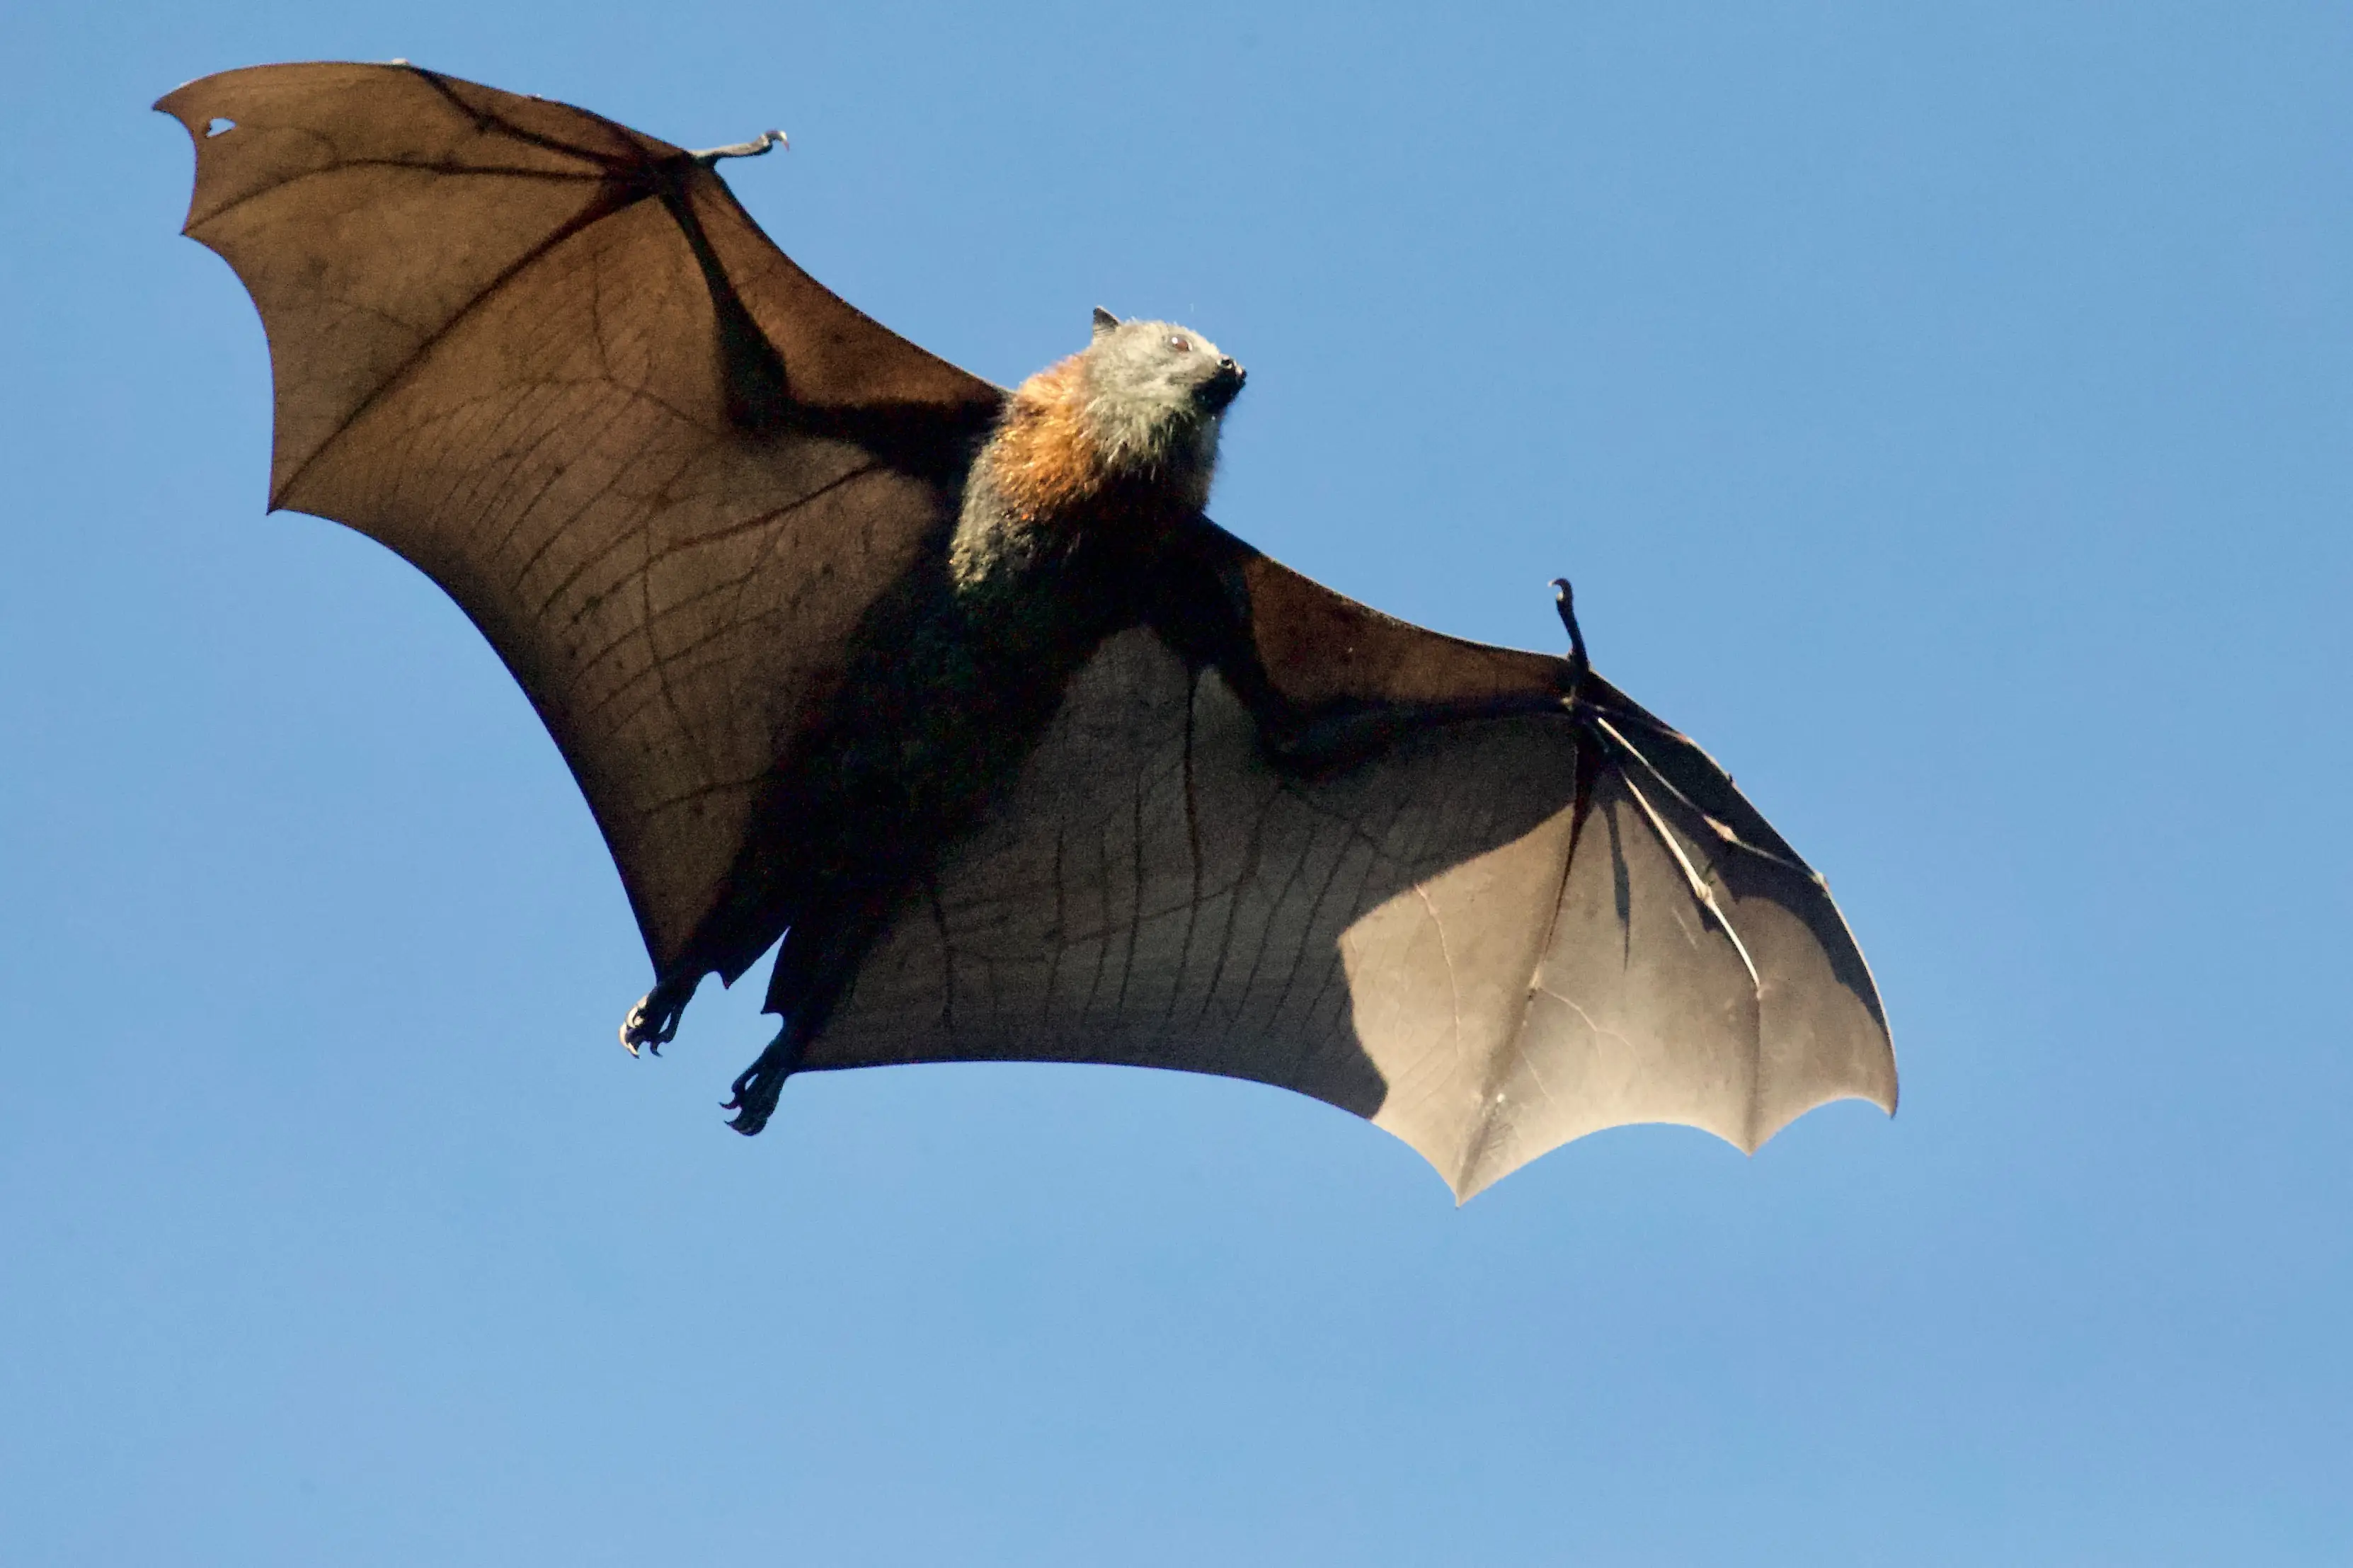 An image of a brown bat hanging from a tree branch to depict the importance of bat conservation and contributing to preserving the ecological balance.